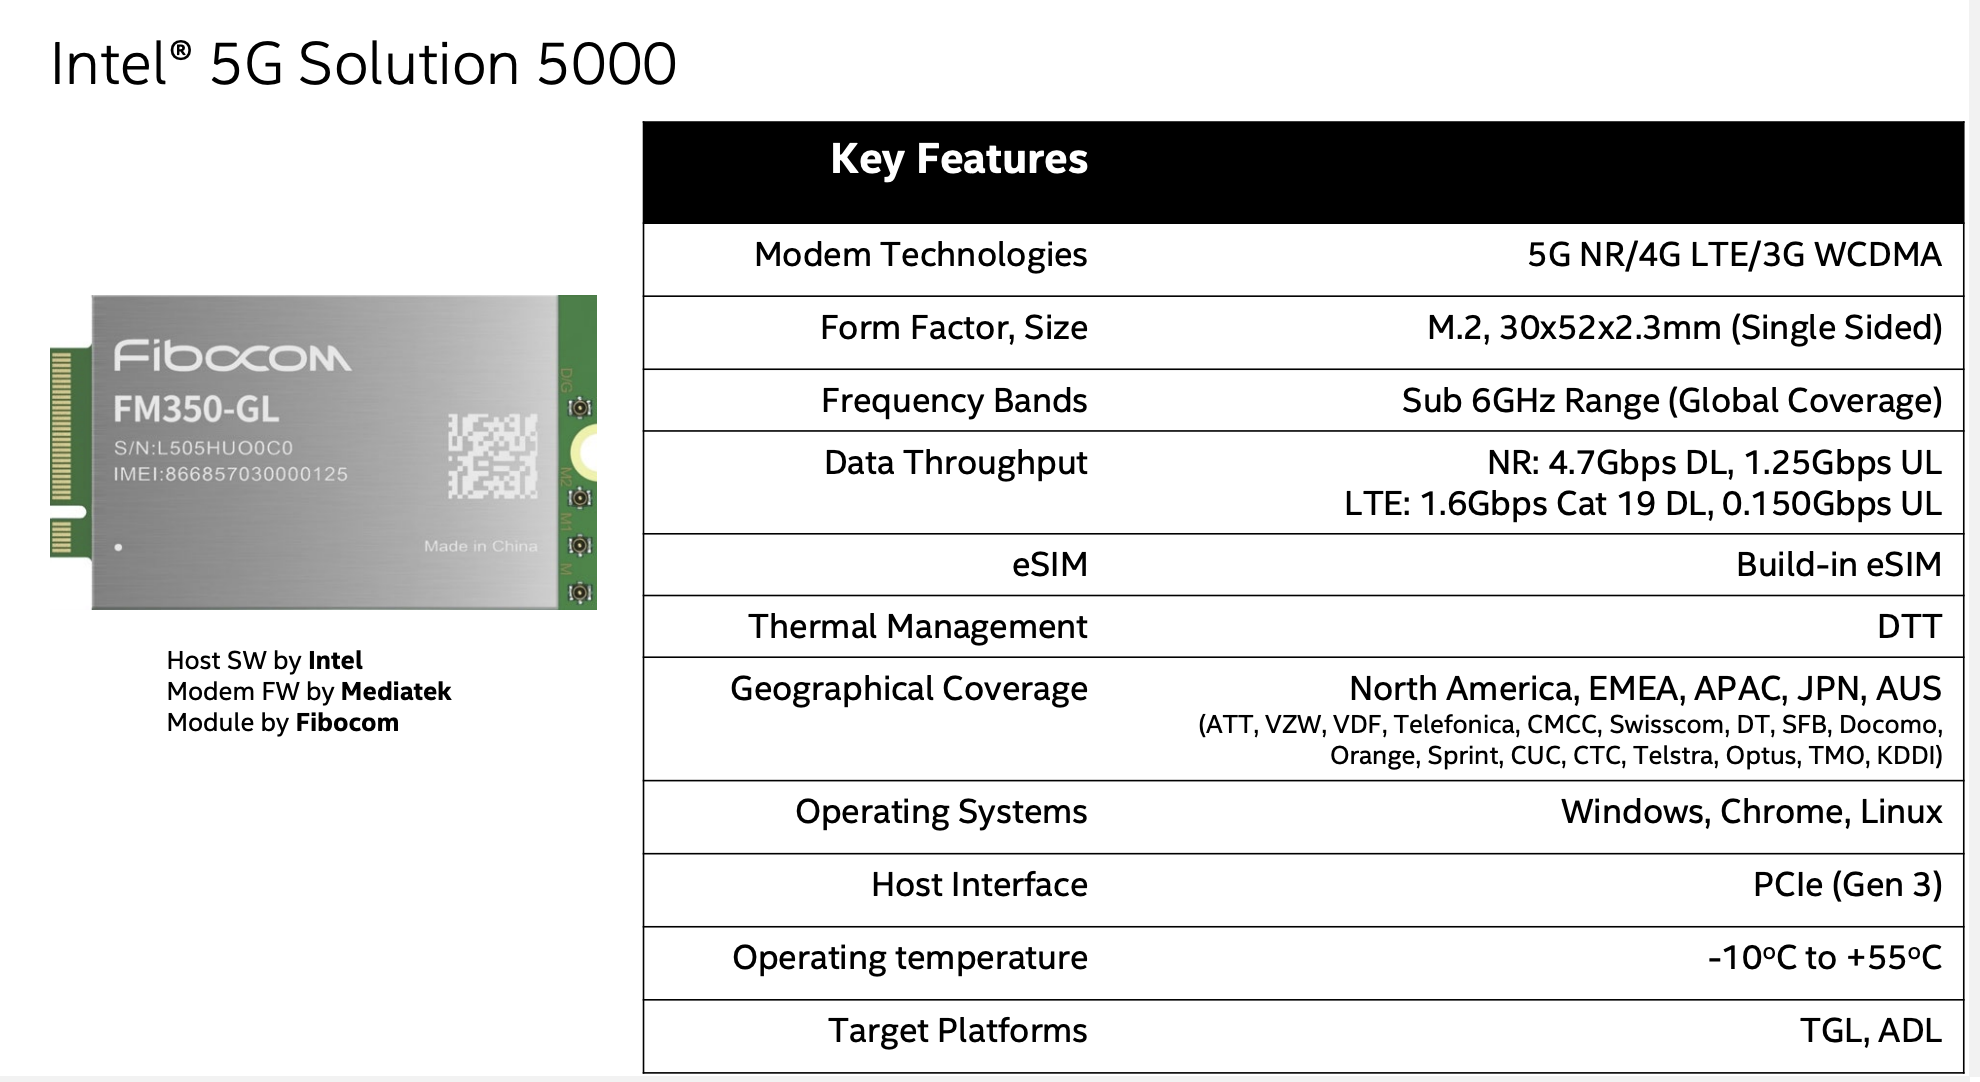 Specs for Intel's new 5G M.2 module